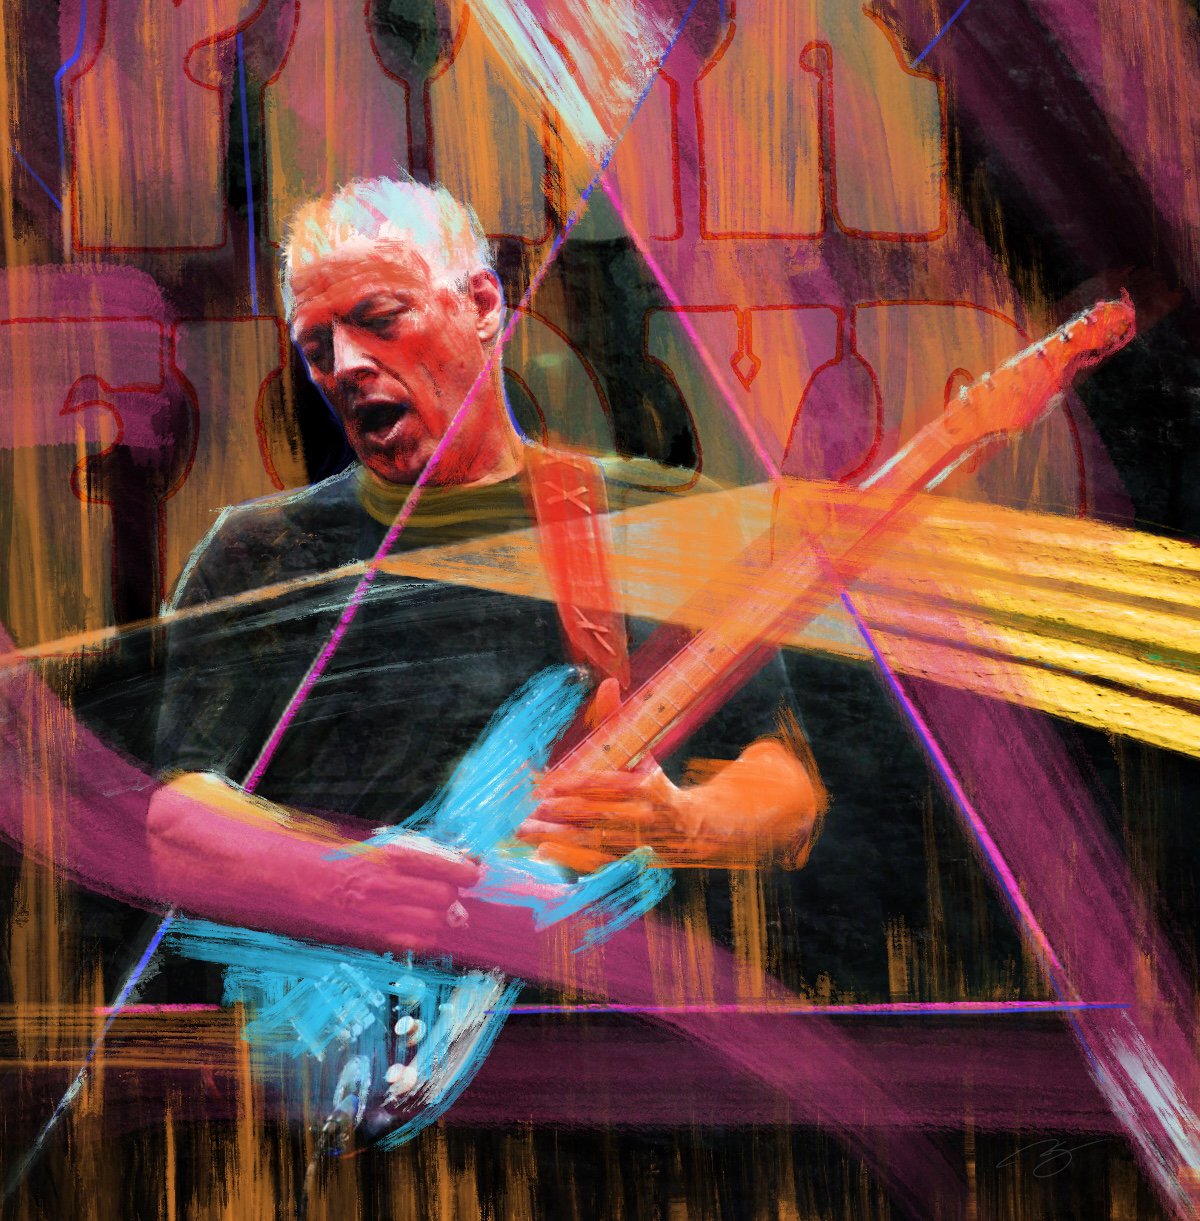 The man uses a guitar like Picasso used a brush. Happy birthday to Pink Floyd\s David Gilmour! 